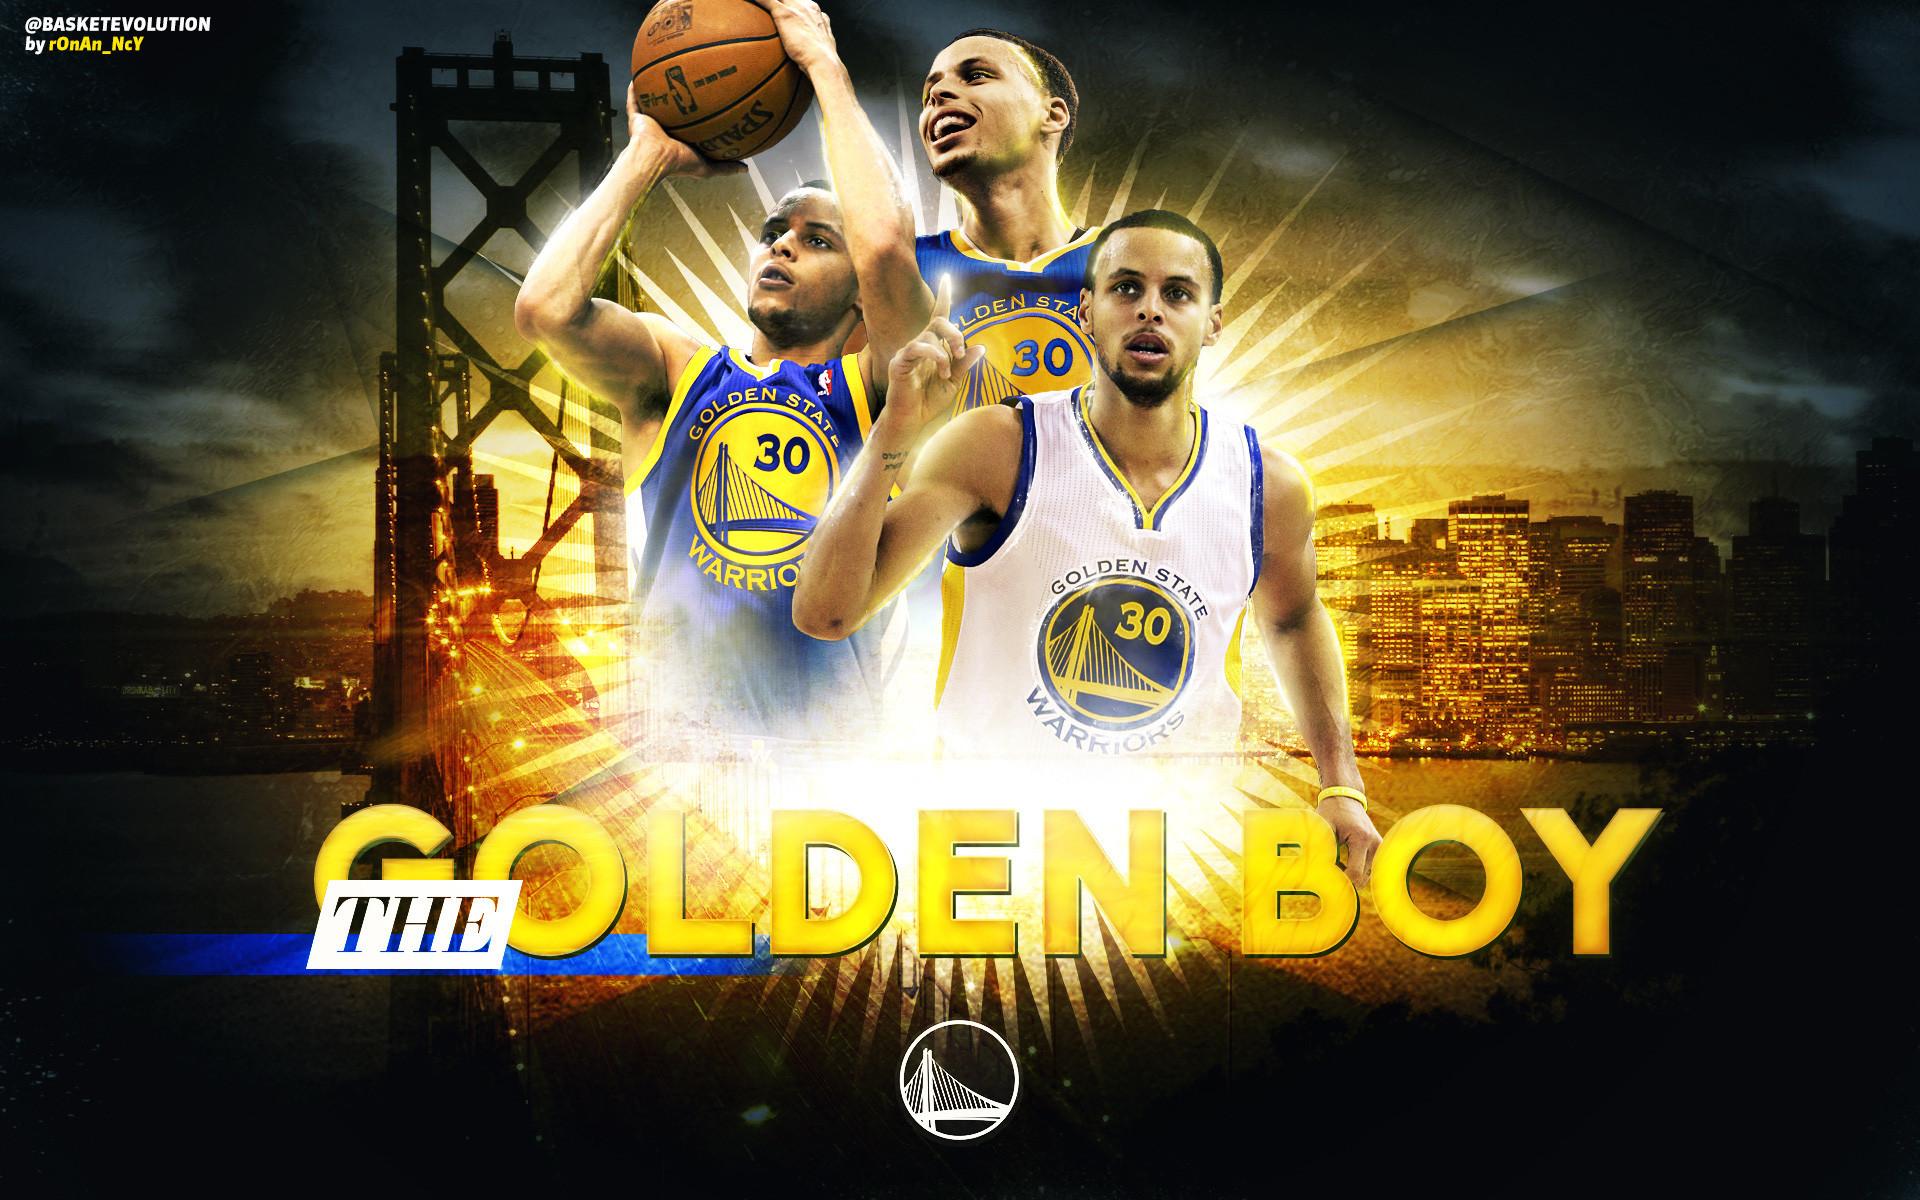 Steph curry live wallpaper